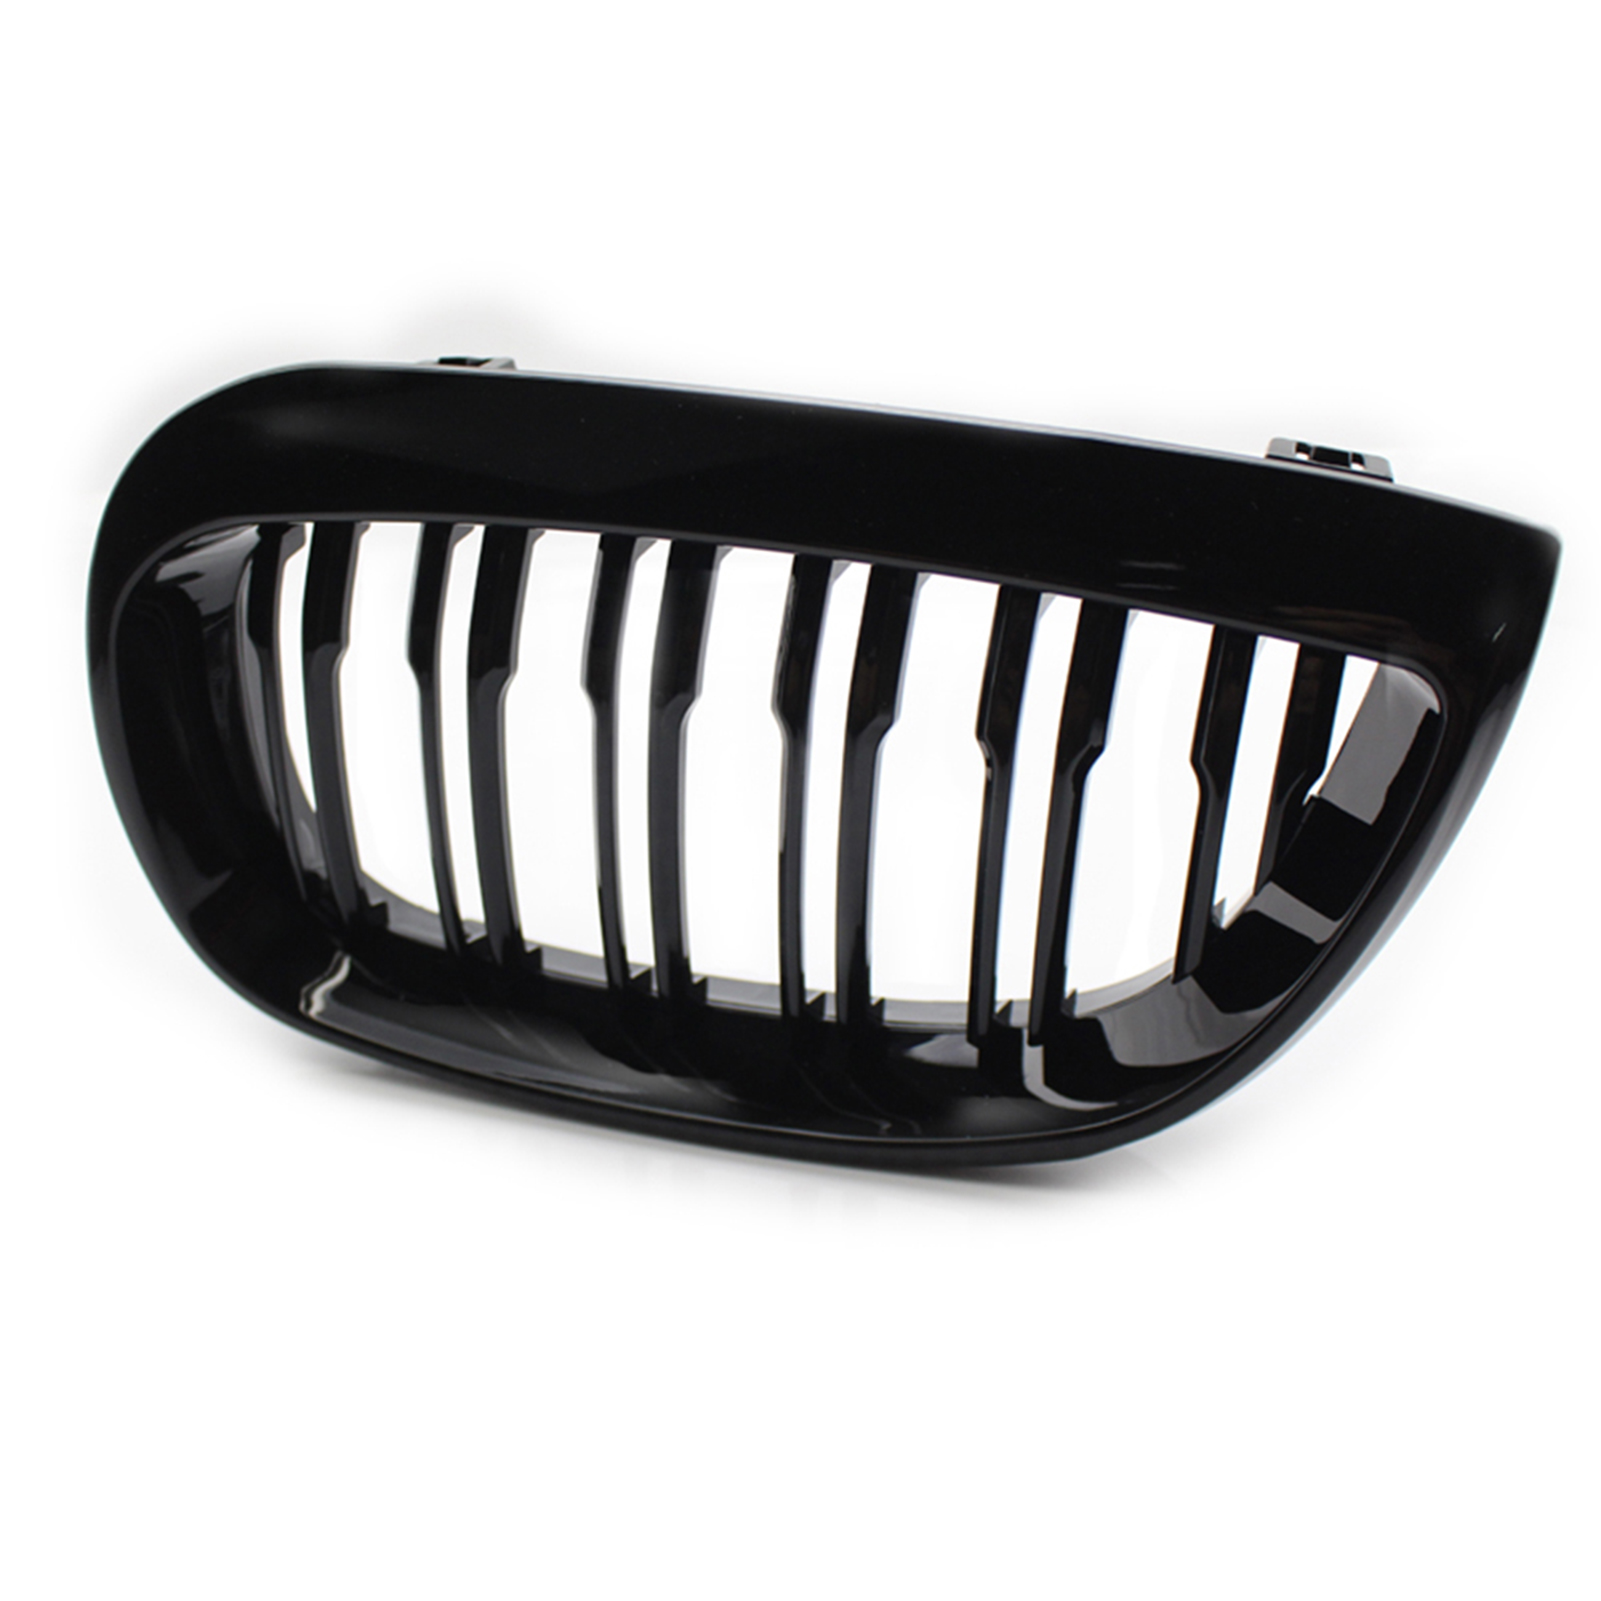 Andoer Pair Front Grille Grills Replacement for 1 Series E81 E87 2004-2007 Car Styling Racing Grills - image 3 of 7